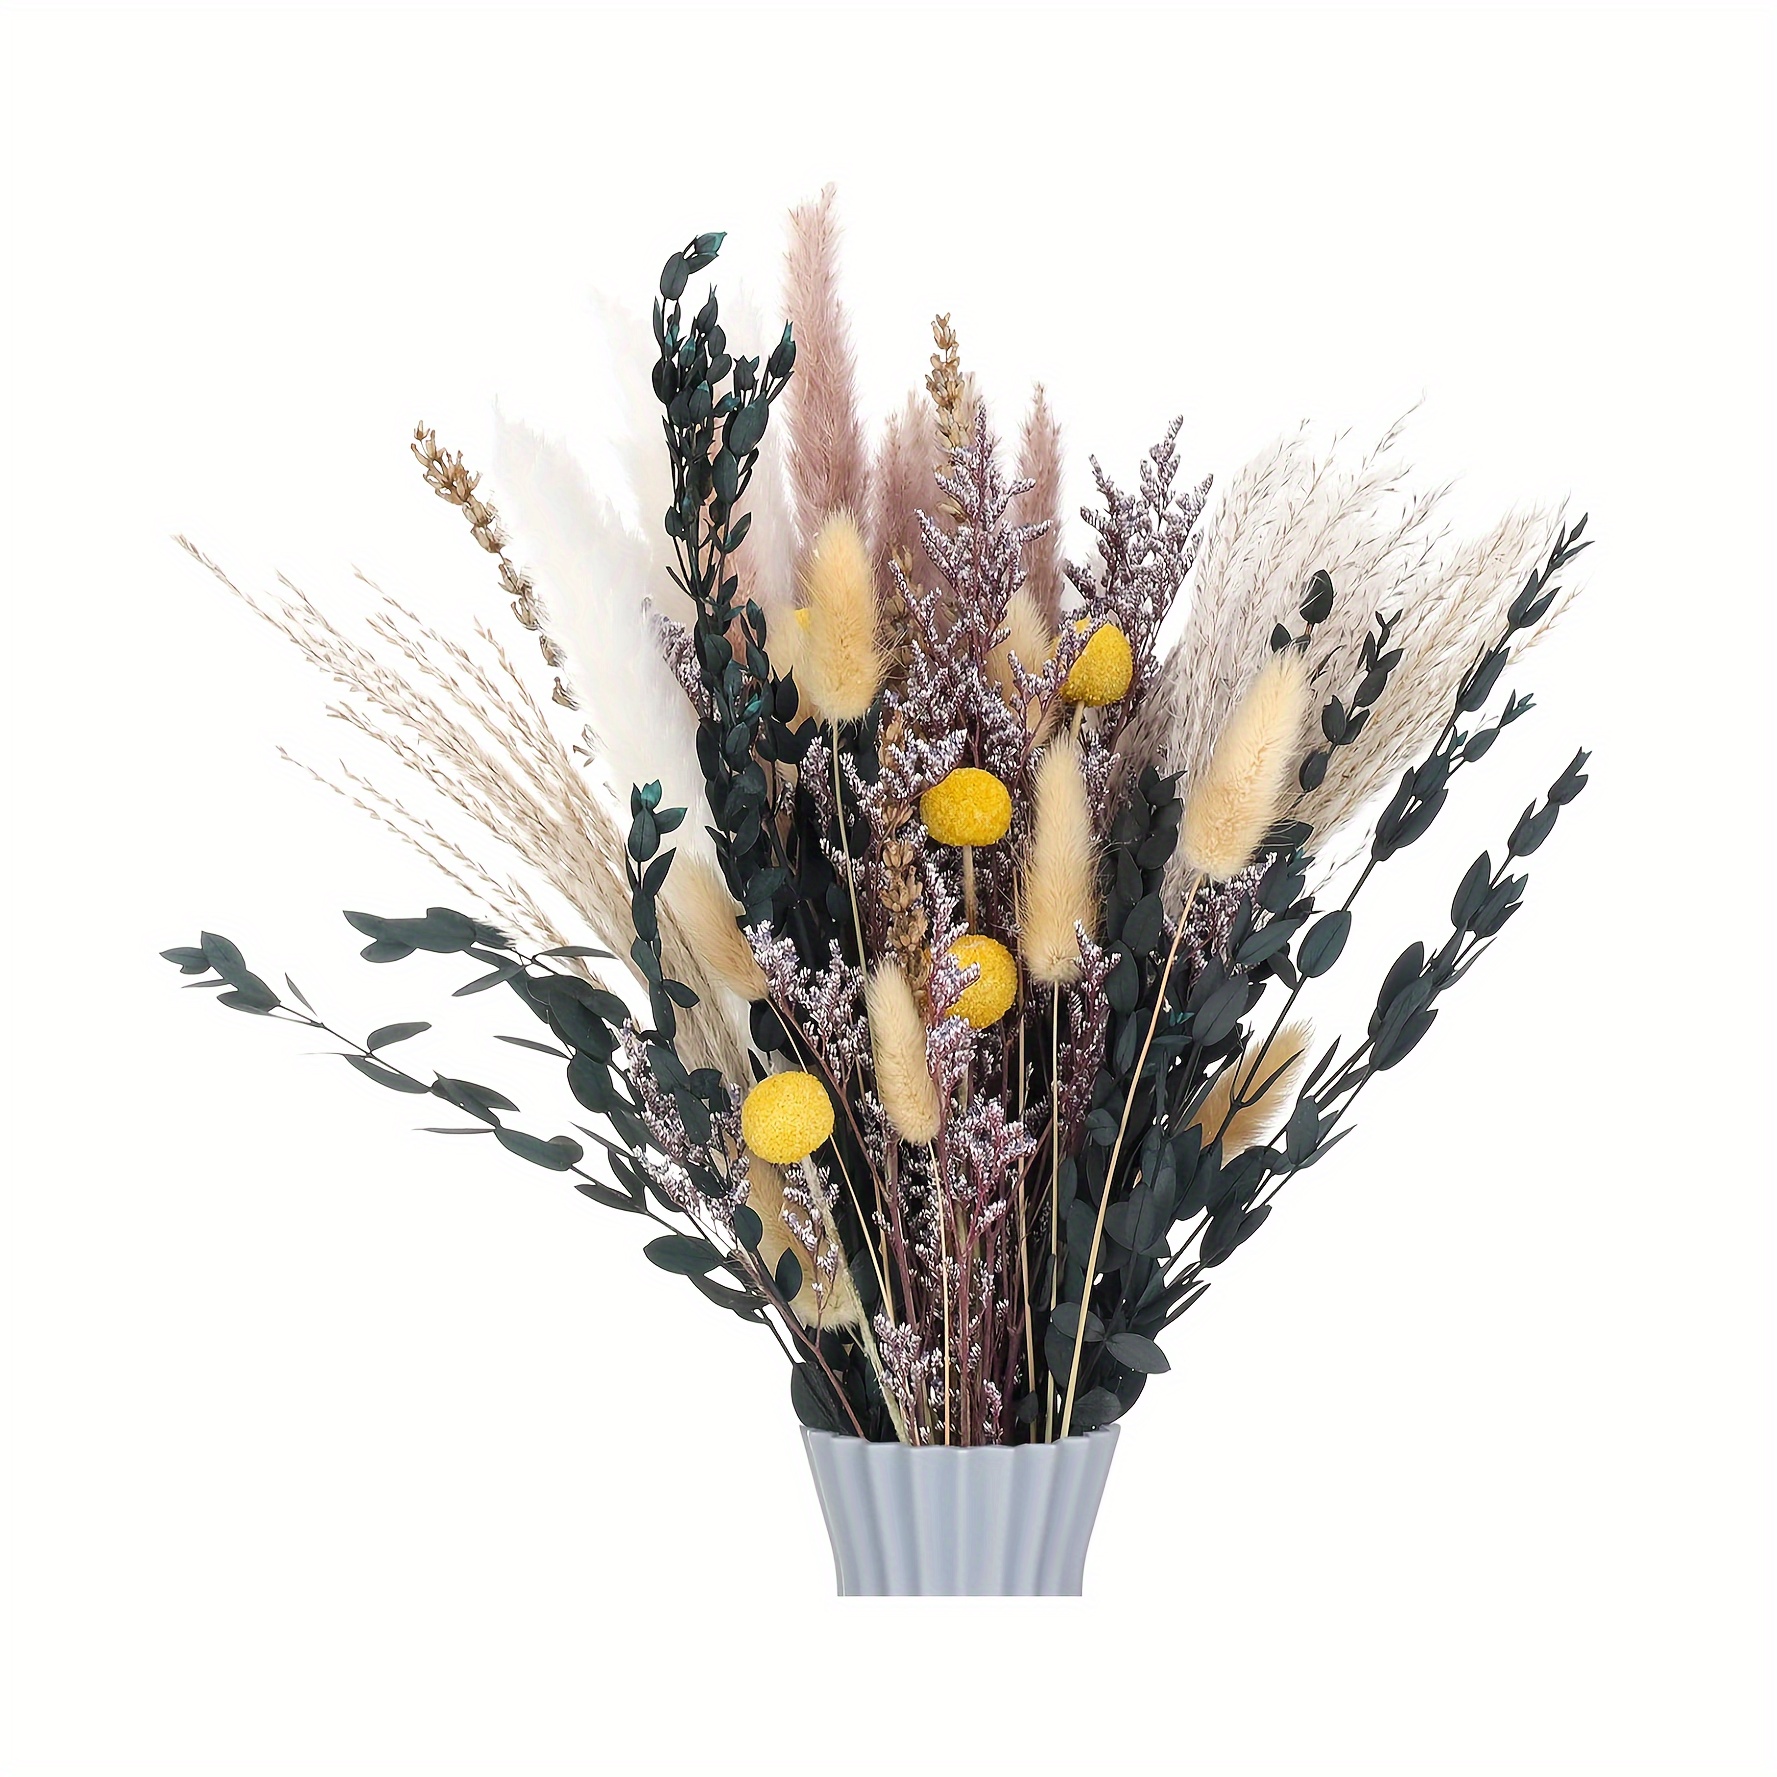 30pcs Dried Flowers Bouquet Real Natural Dried Flowers Bundles Artificial  Flowers for Home Vase Wedding Photography Props Decor